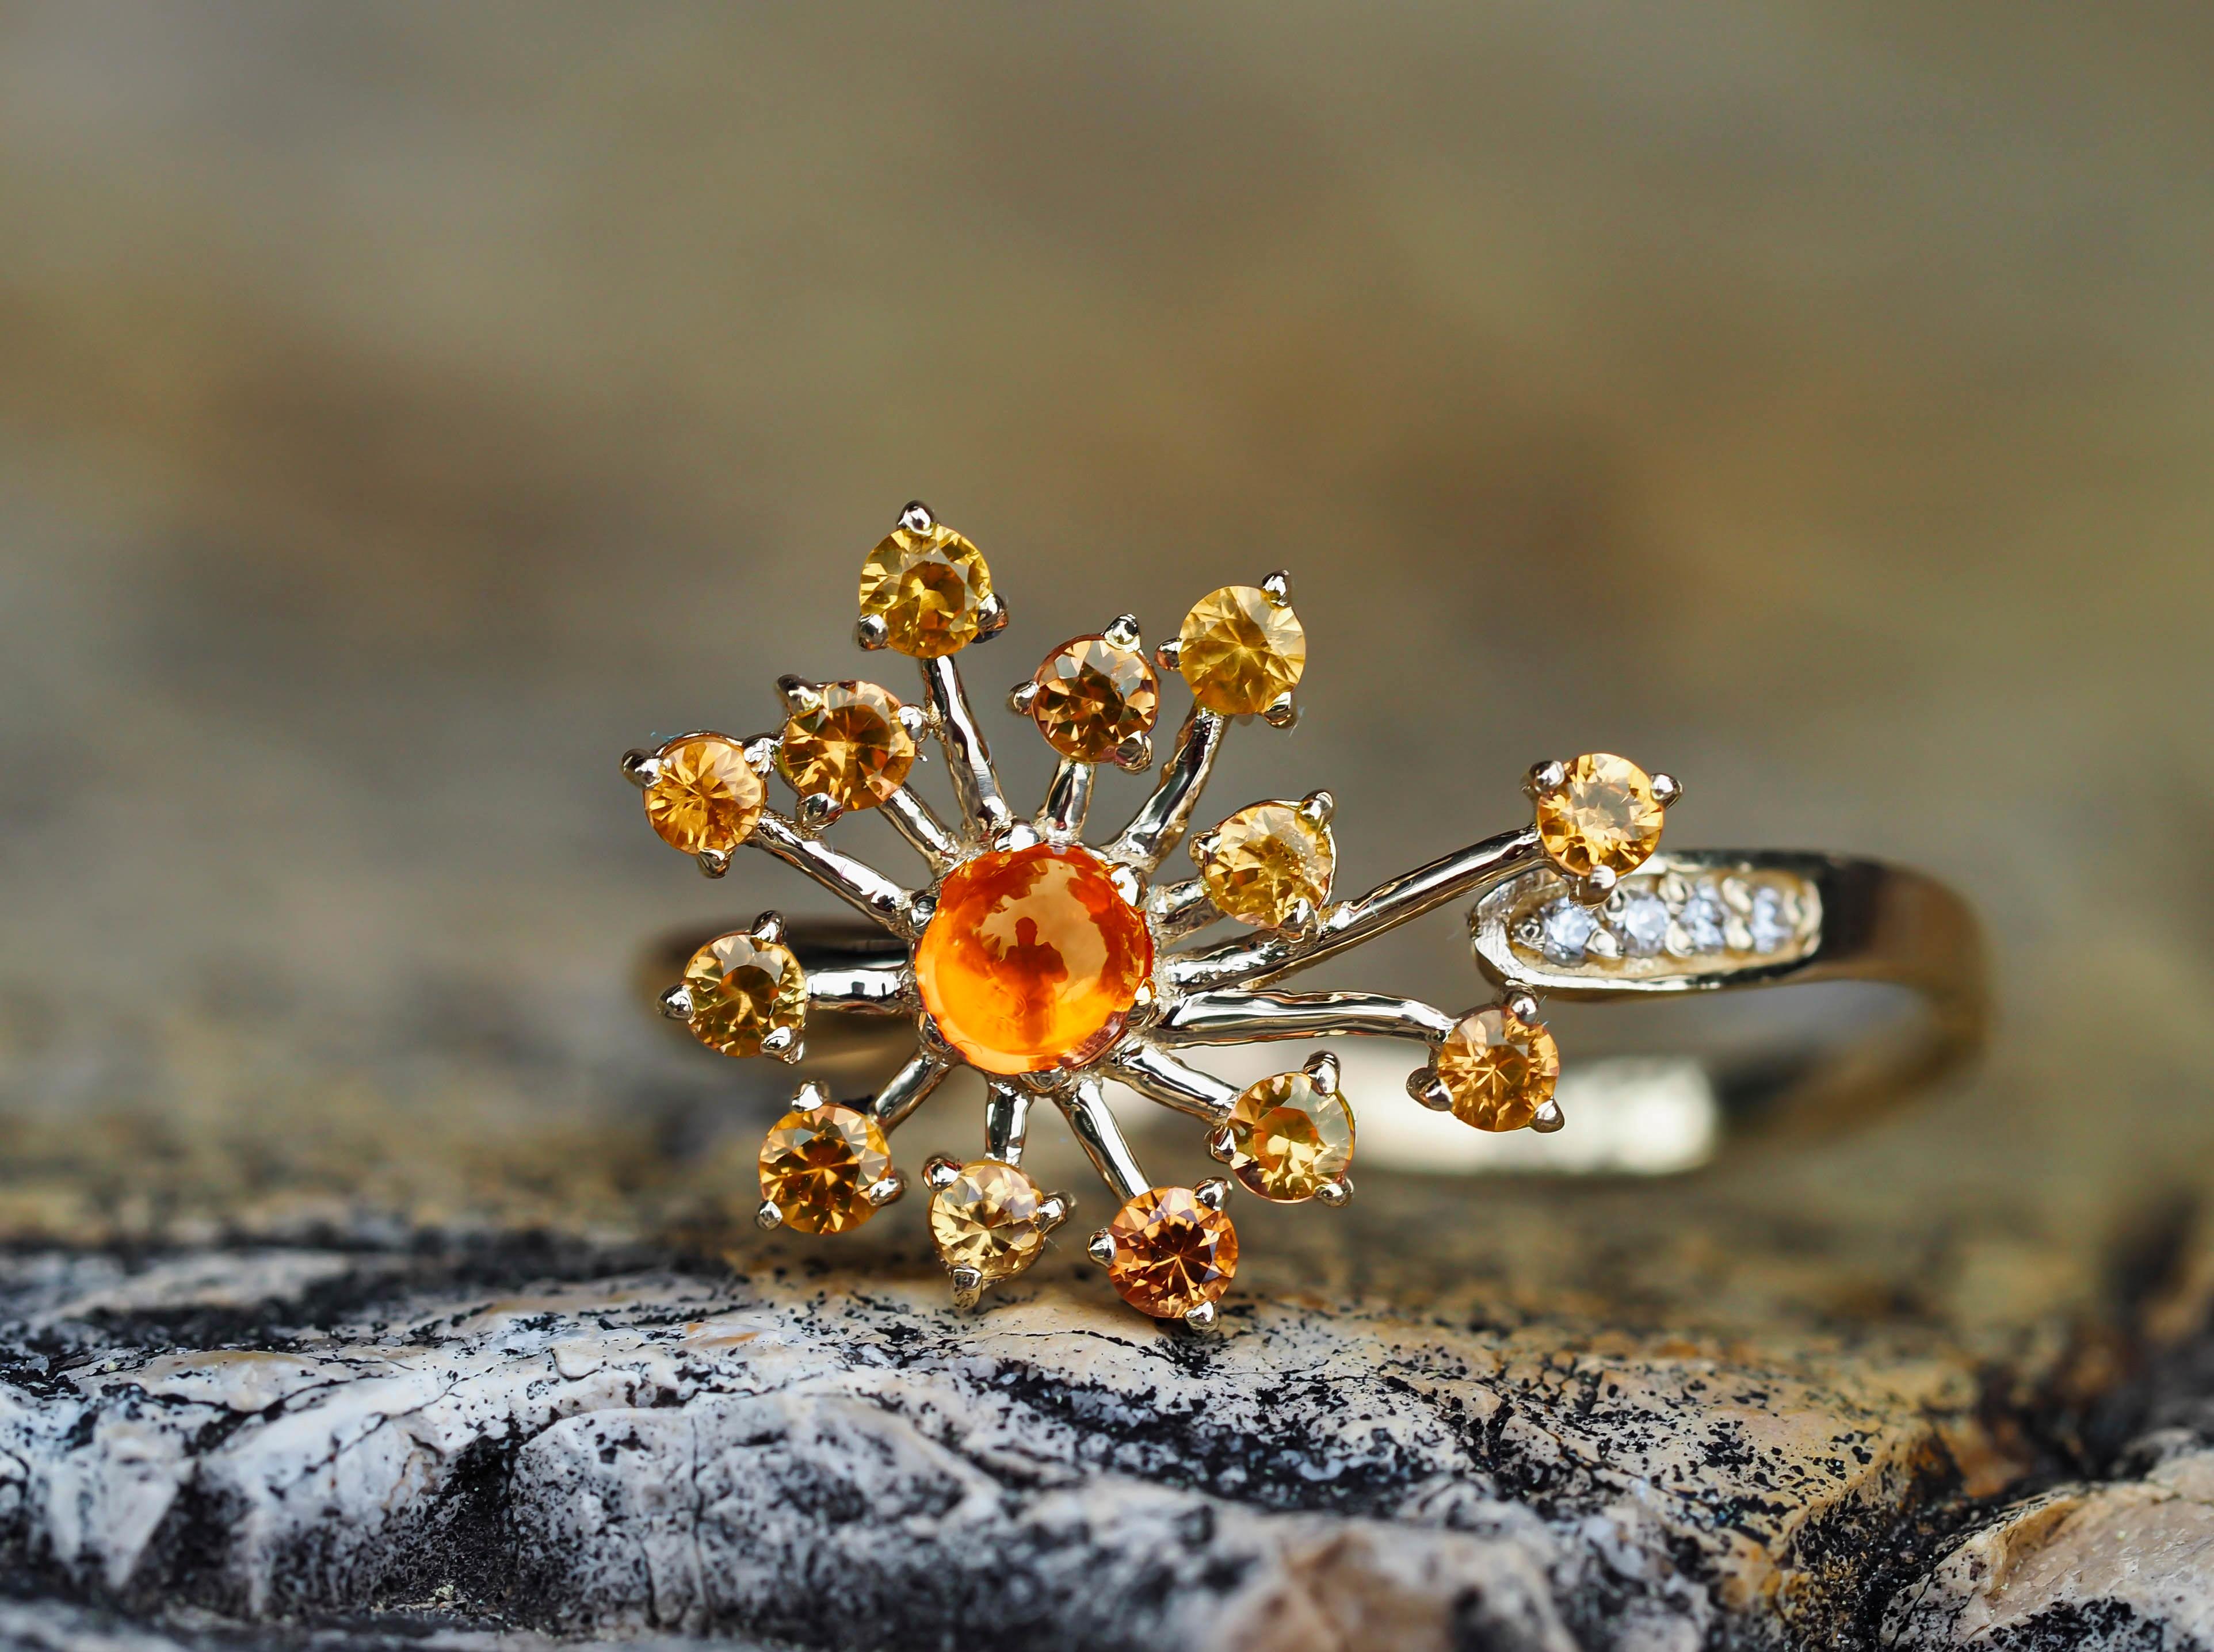 Dandelion Flower set: ring and earrings with yellow sapphires and diamonds

Earrings:
Metal: 14 karat gold
Weight: 1.45 g.
Size: 15 x 12.4 mm.
Central stones: Genuine sapphires
Cut: Round cabochon
Weight: approx 0.60 ct.
Color: Yellow
Clarity: